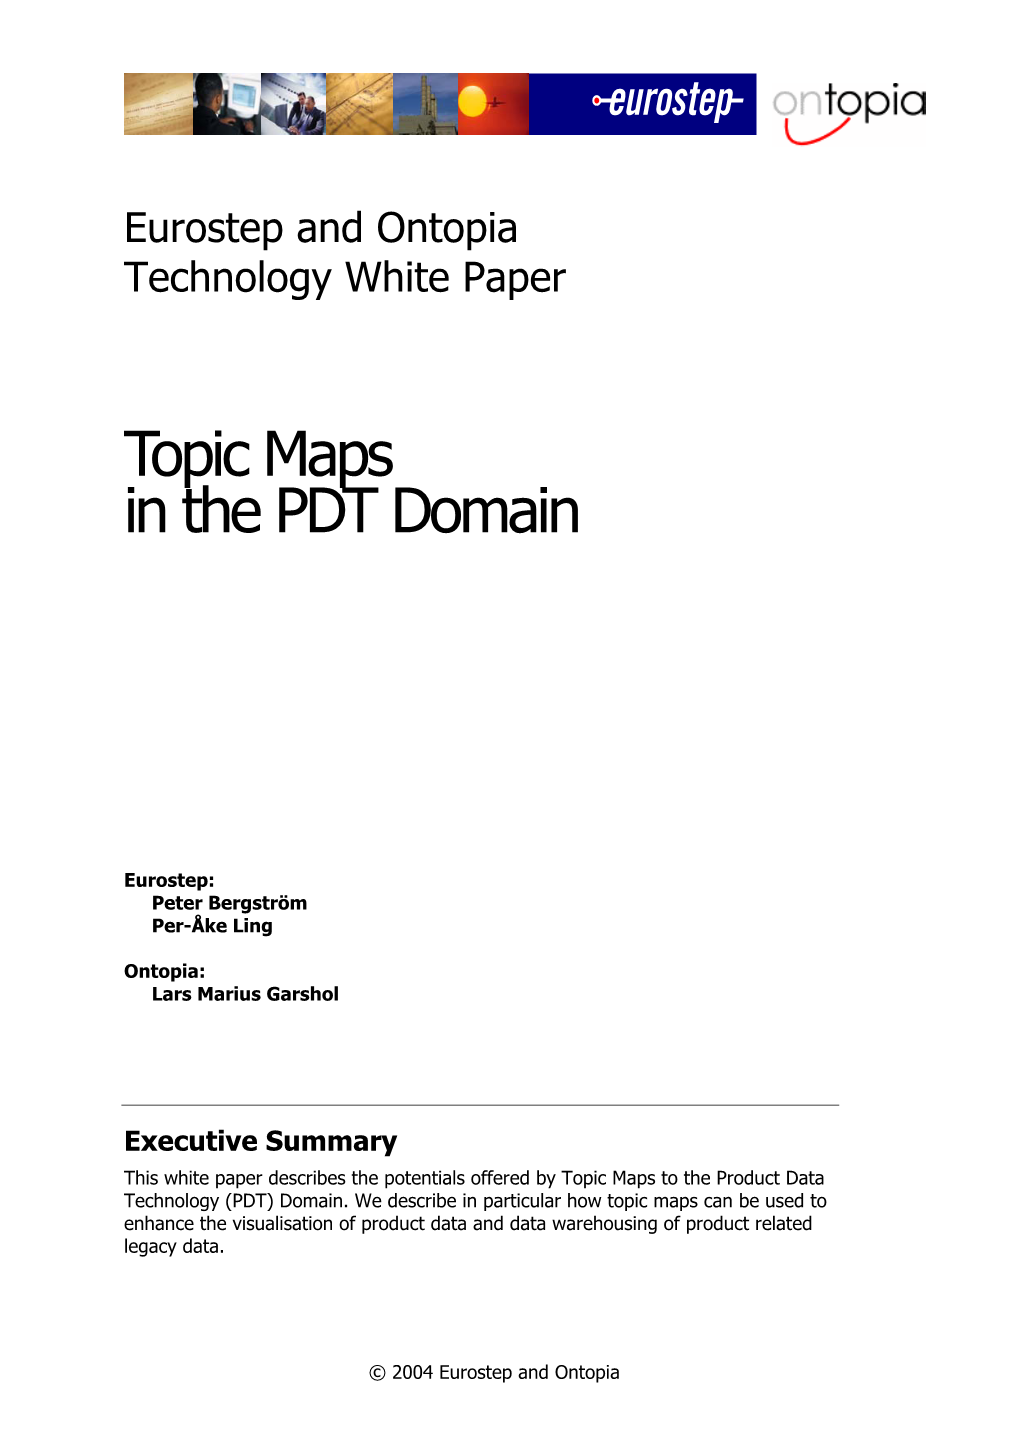 Topic Maps in the PDT Domain